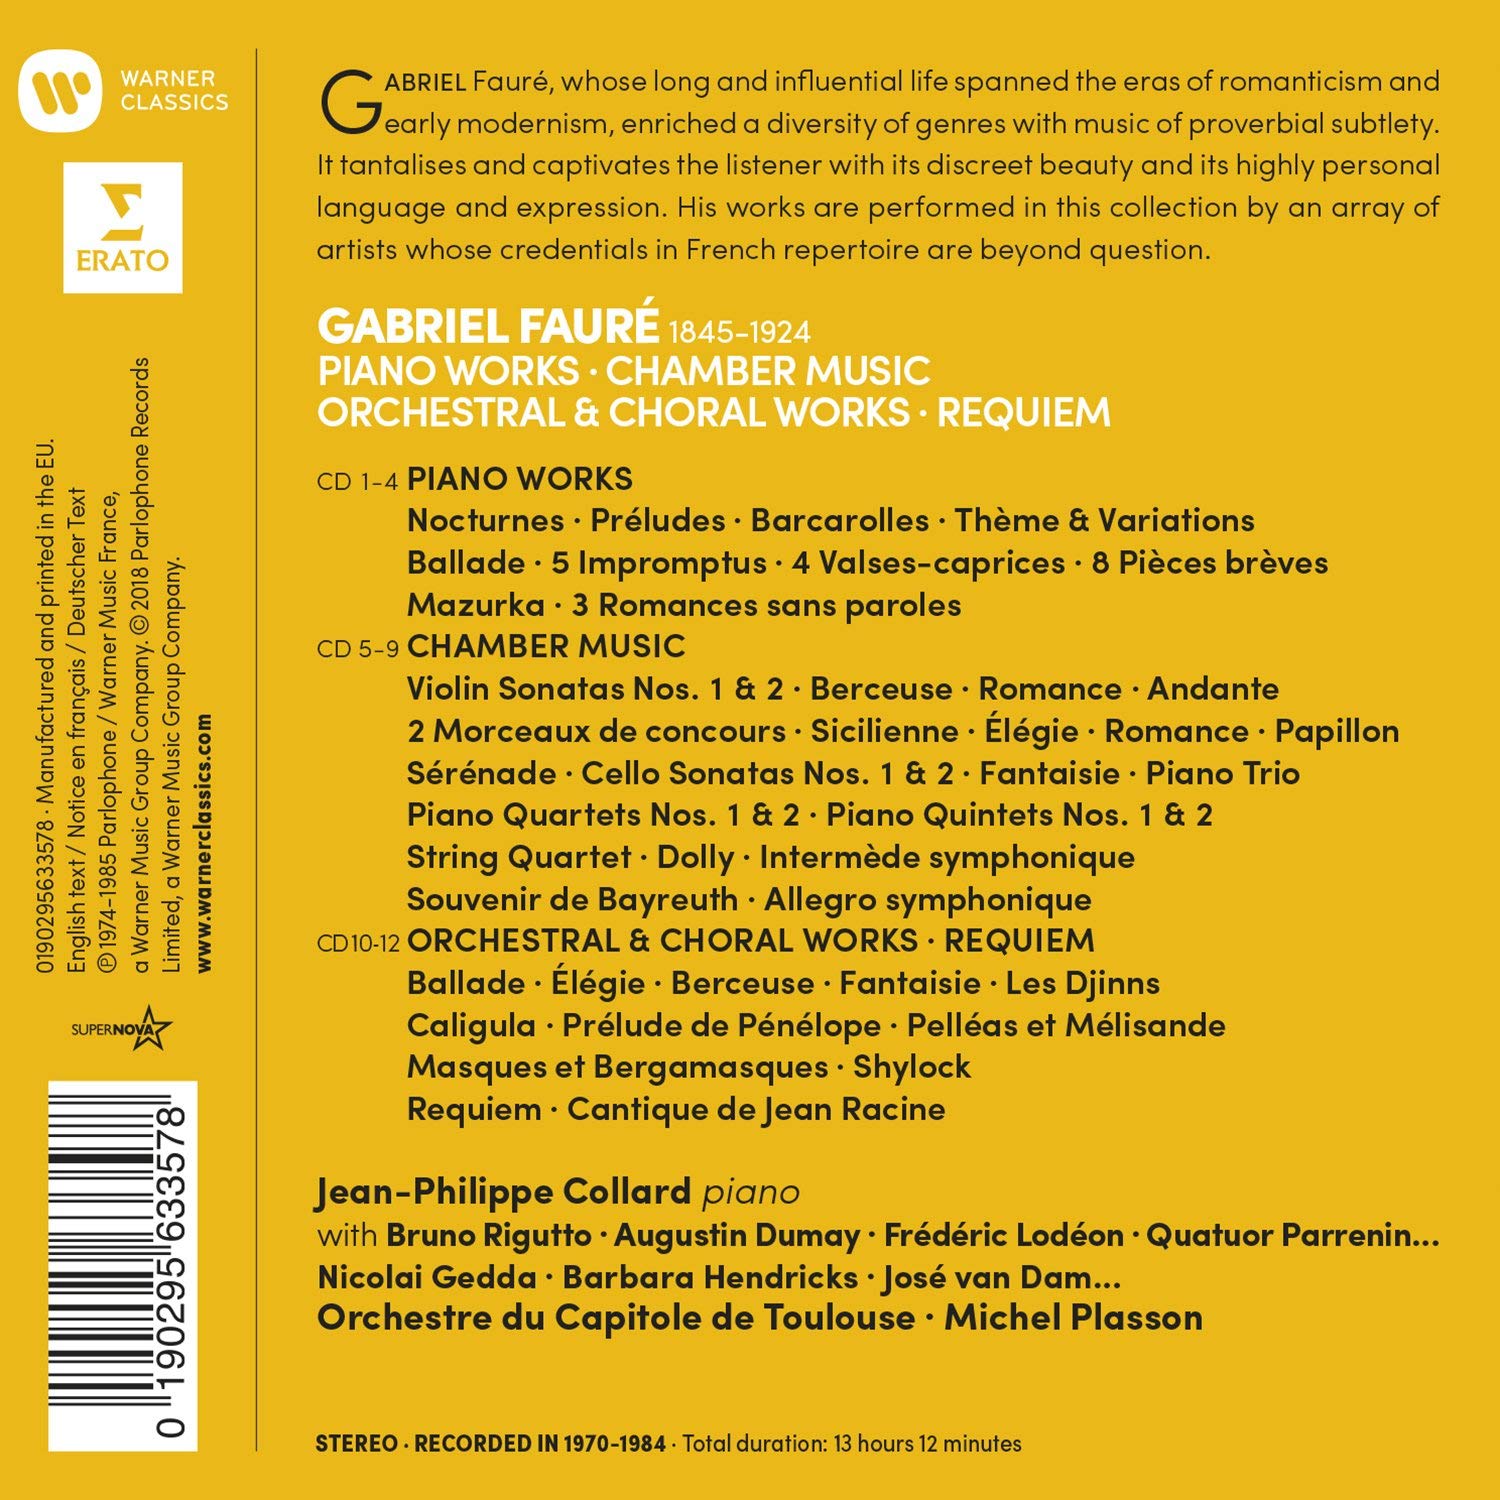 Jean-Philippe Collard / Michel Plasson 포레: 피아노, 실내악, 관현악 & 합창 작품, 레퀴엠 (Faure: Piano Works, Chamber Music, Orchestral & Choral Works, Requiem)